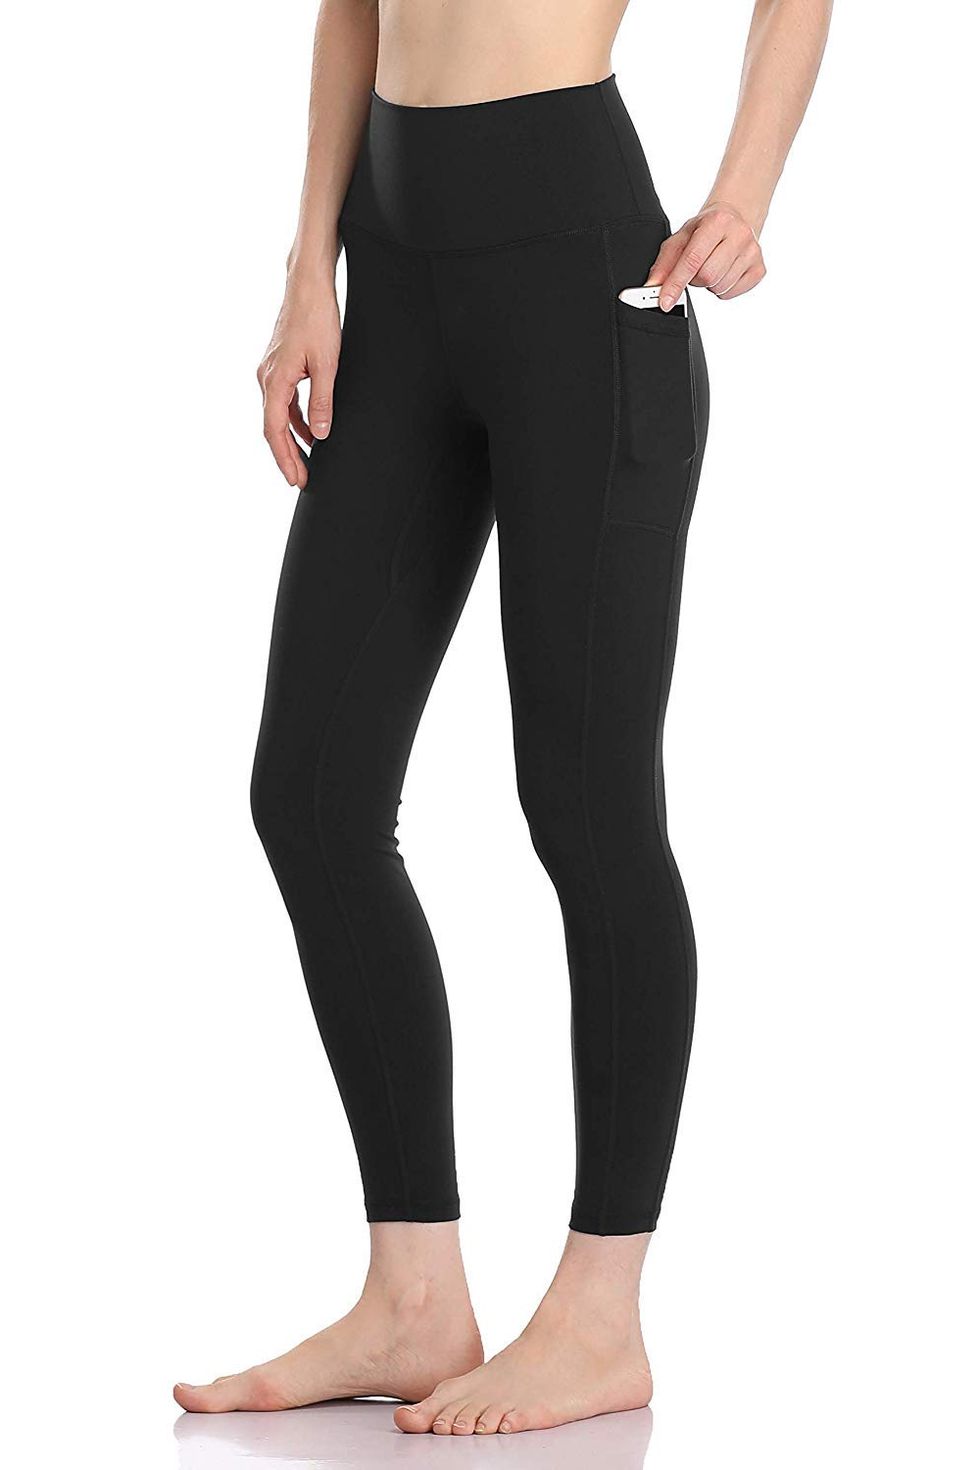 Buy Dragon Fit Compression Yoga Pants with Inner Pockets in High